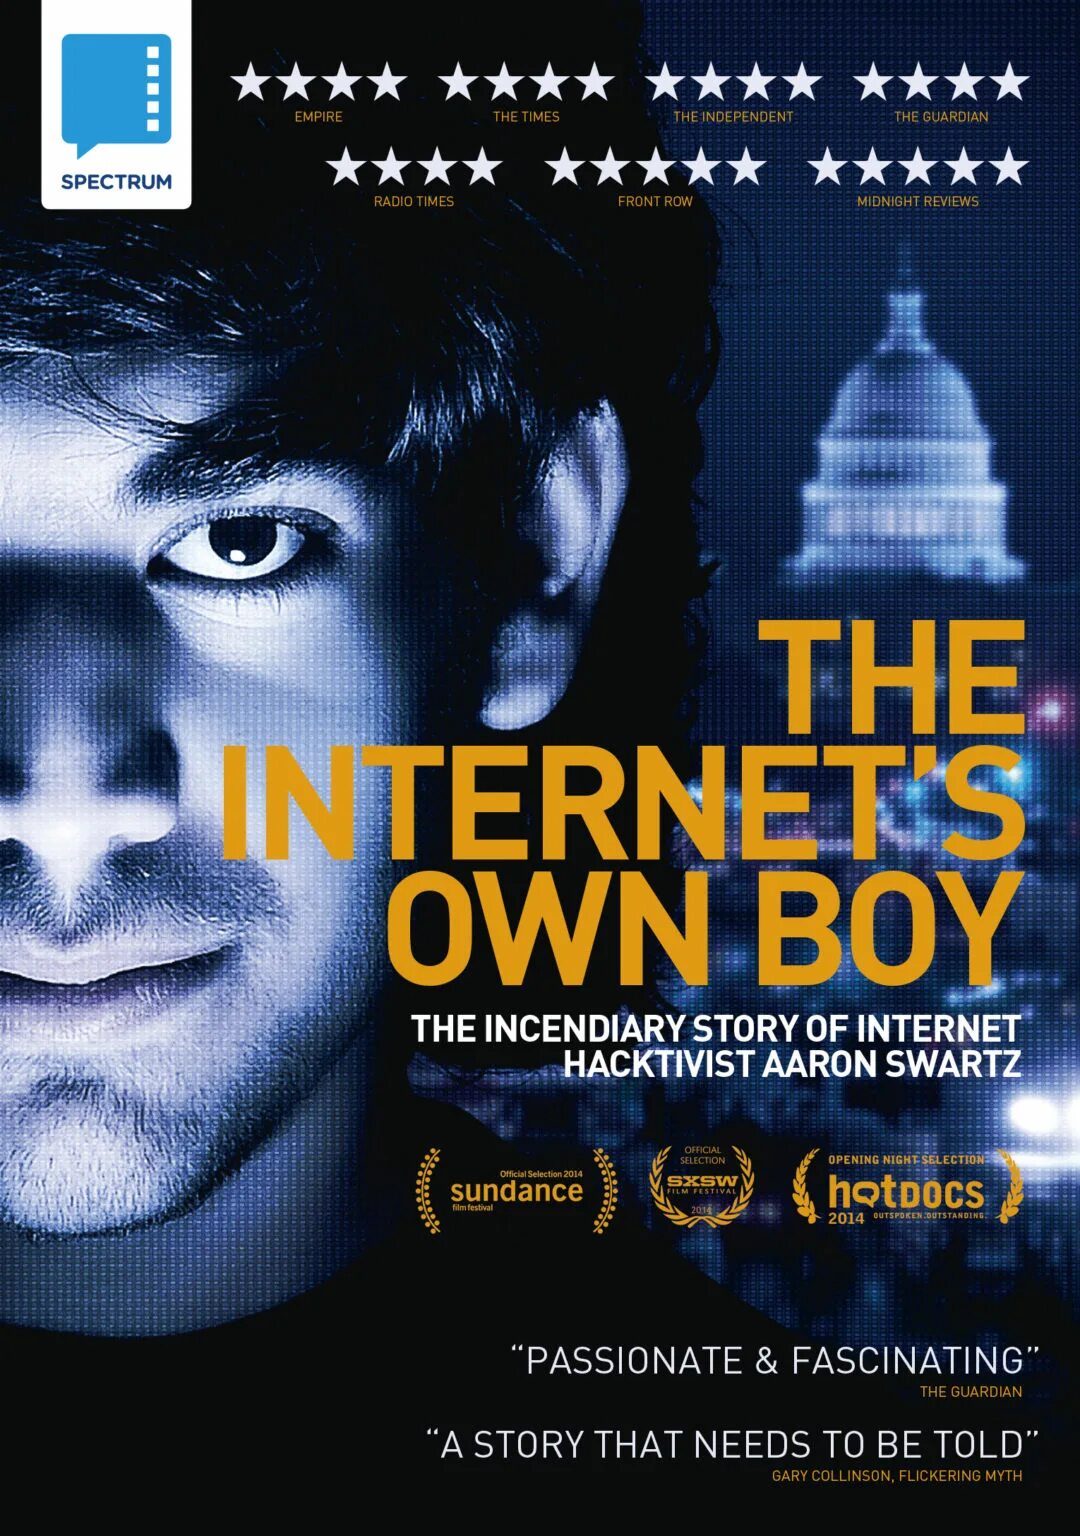 The Internet’s own boy. The Internet’s own boy (2014). Poster the Internet’s own boy. The Internet's own boy PNG.